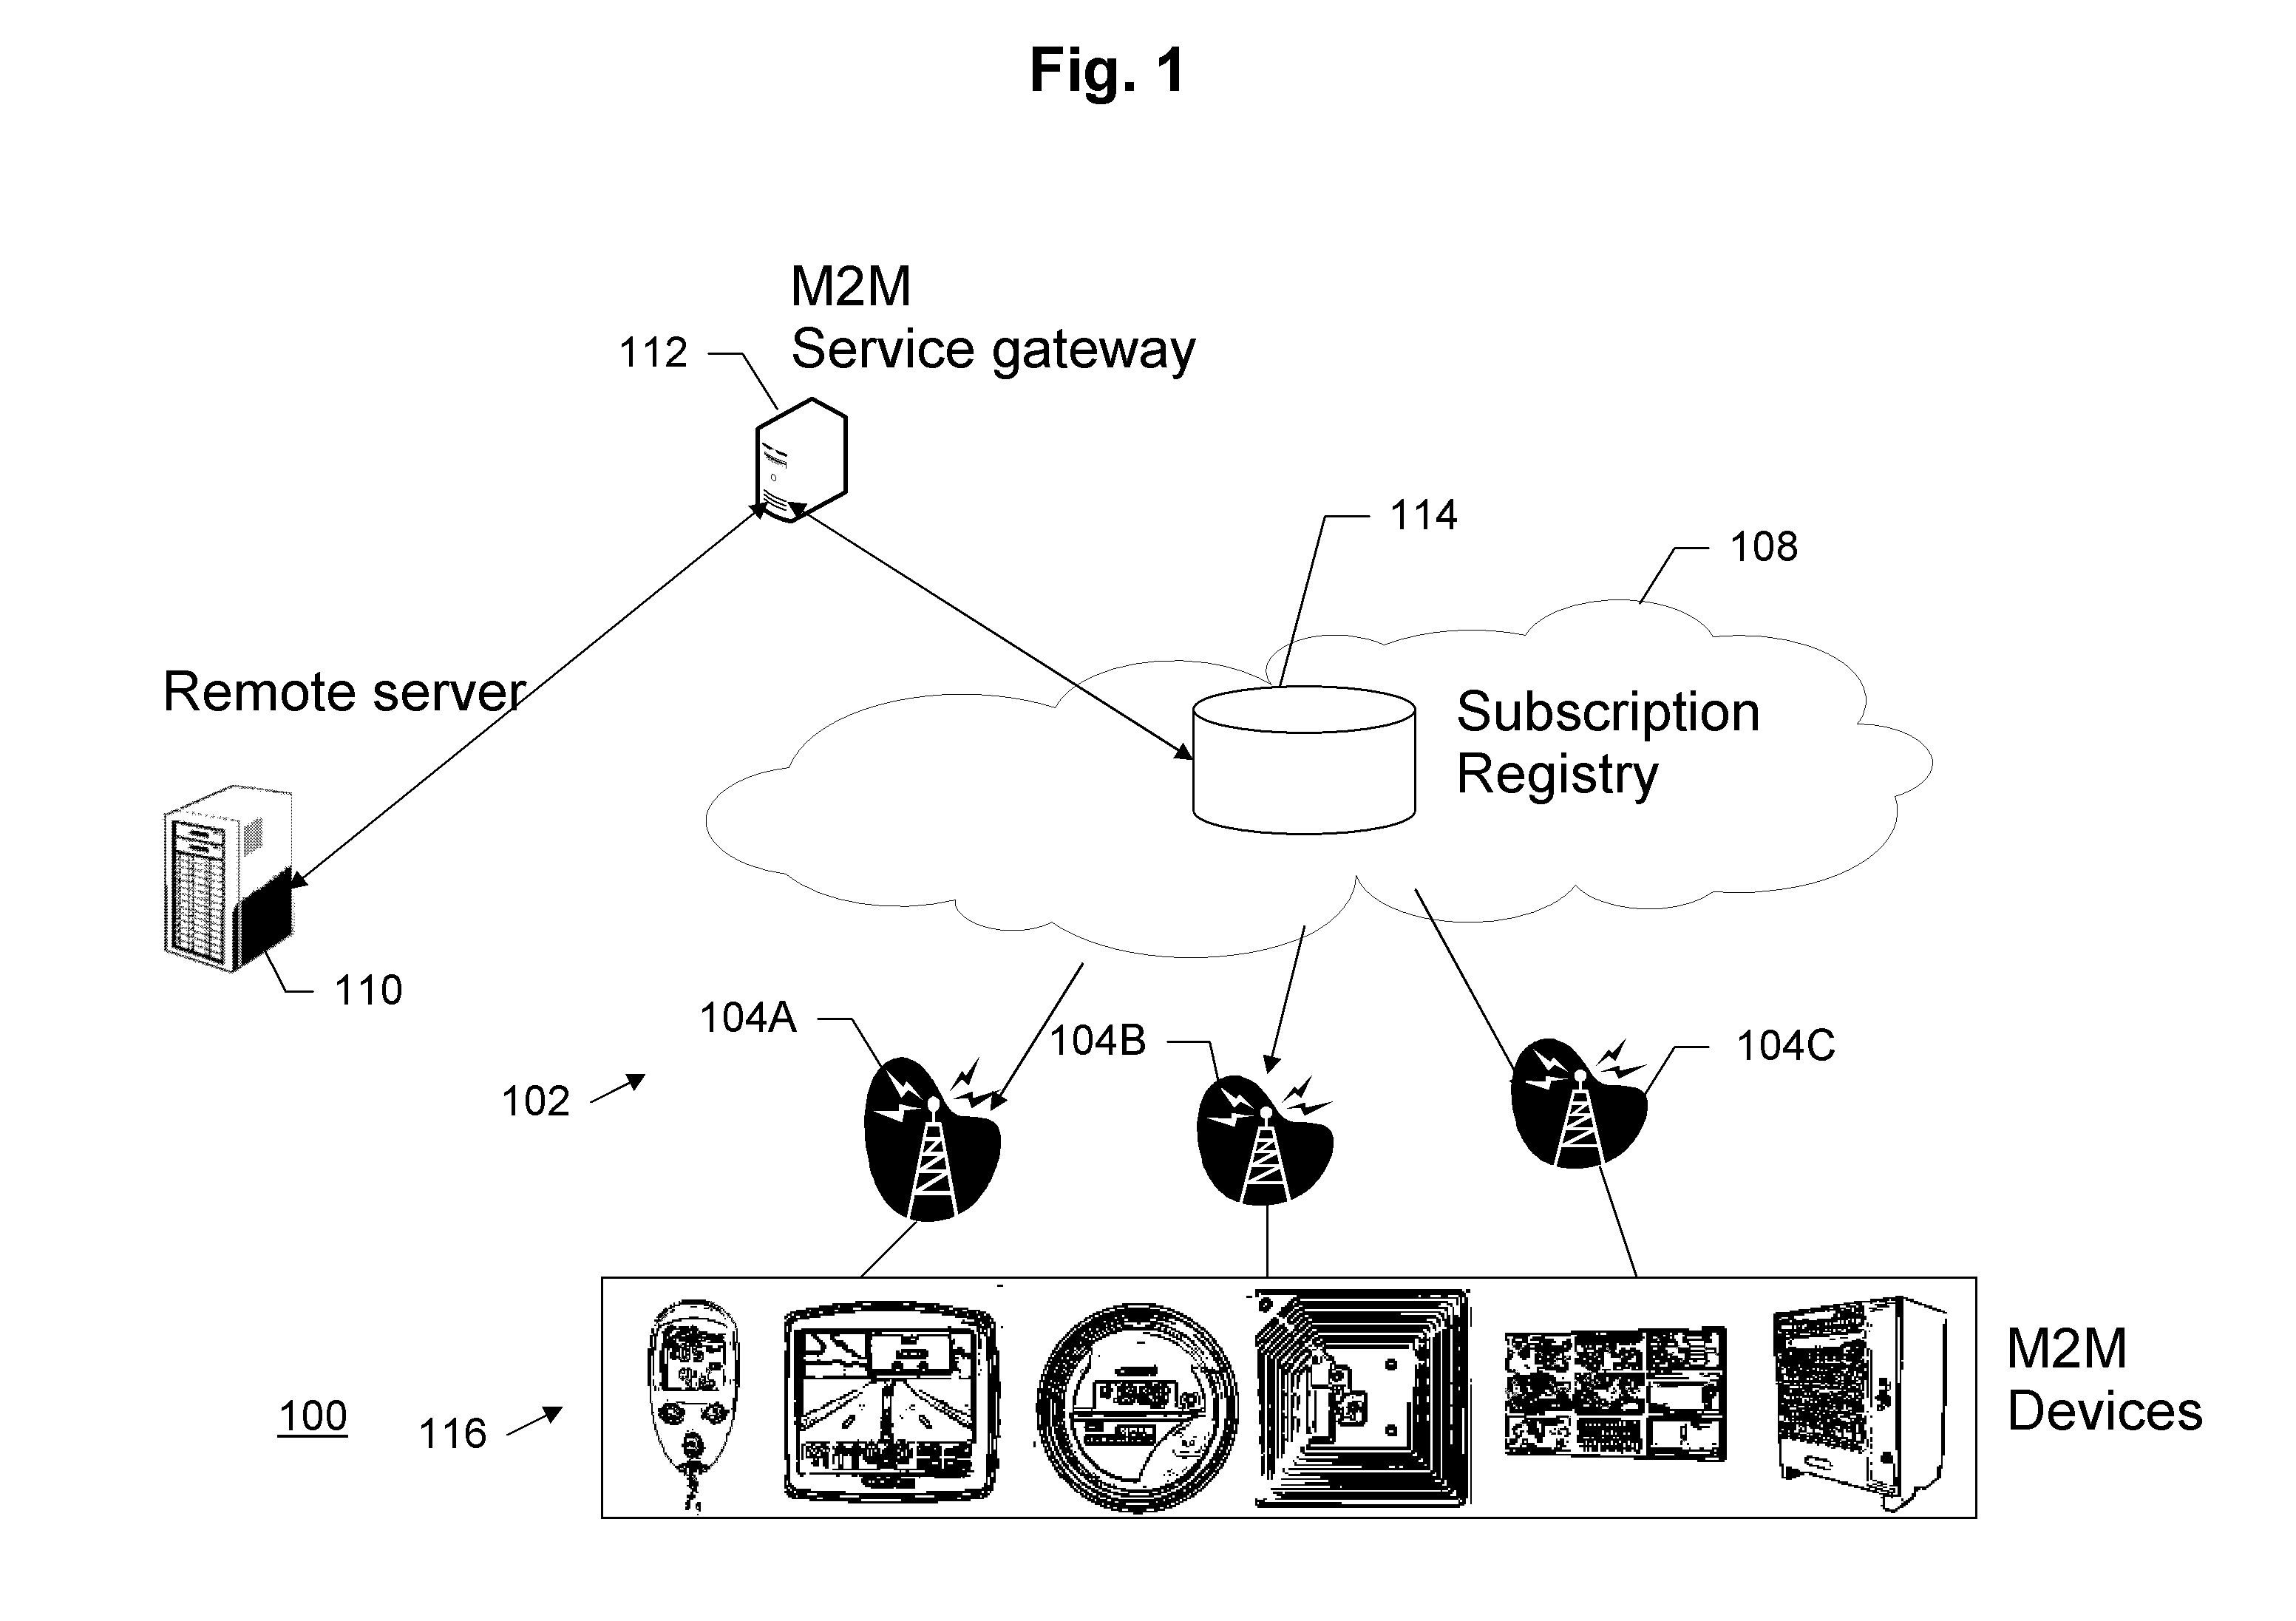 Providing Dynamic Group Subscriptions For M2M Device Communication